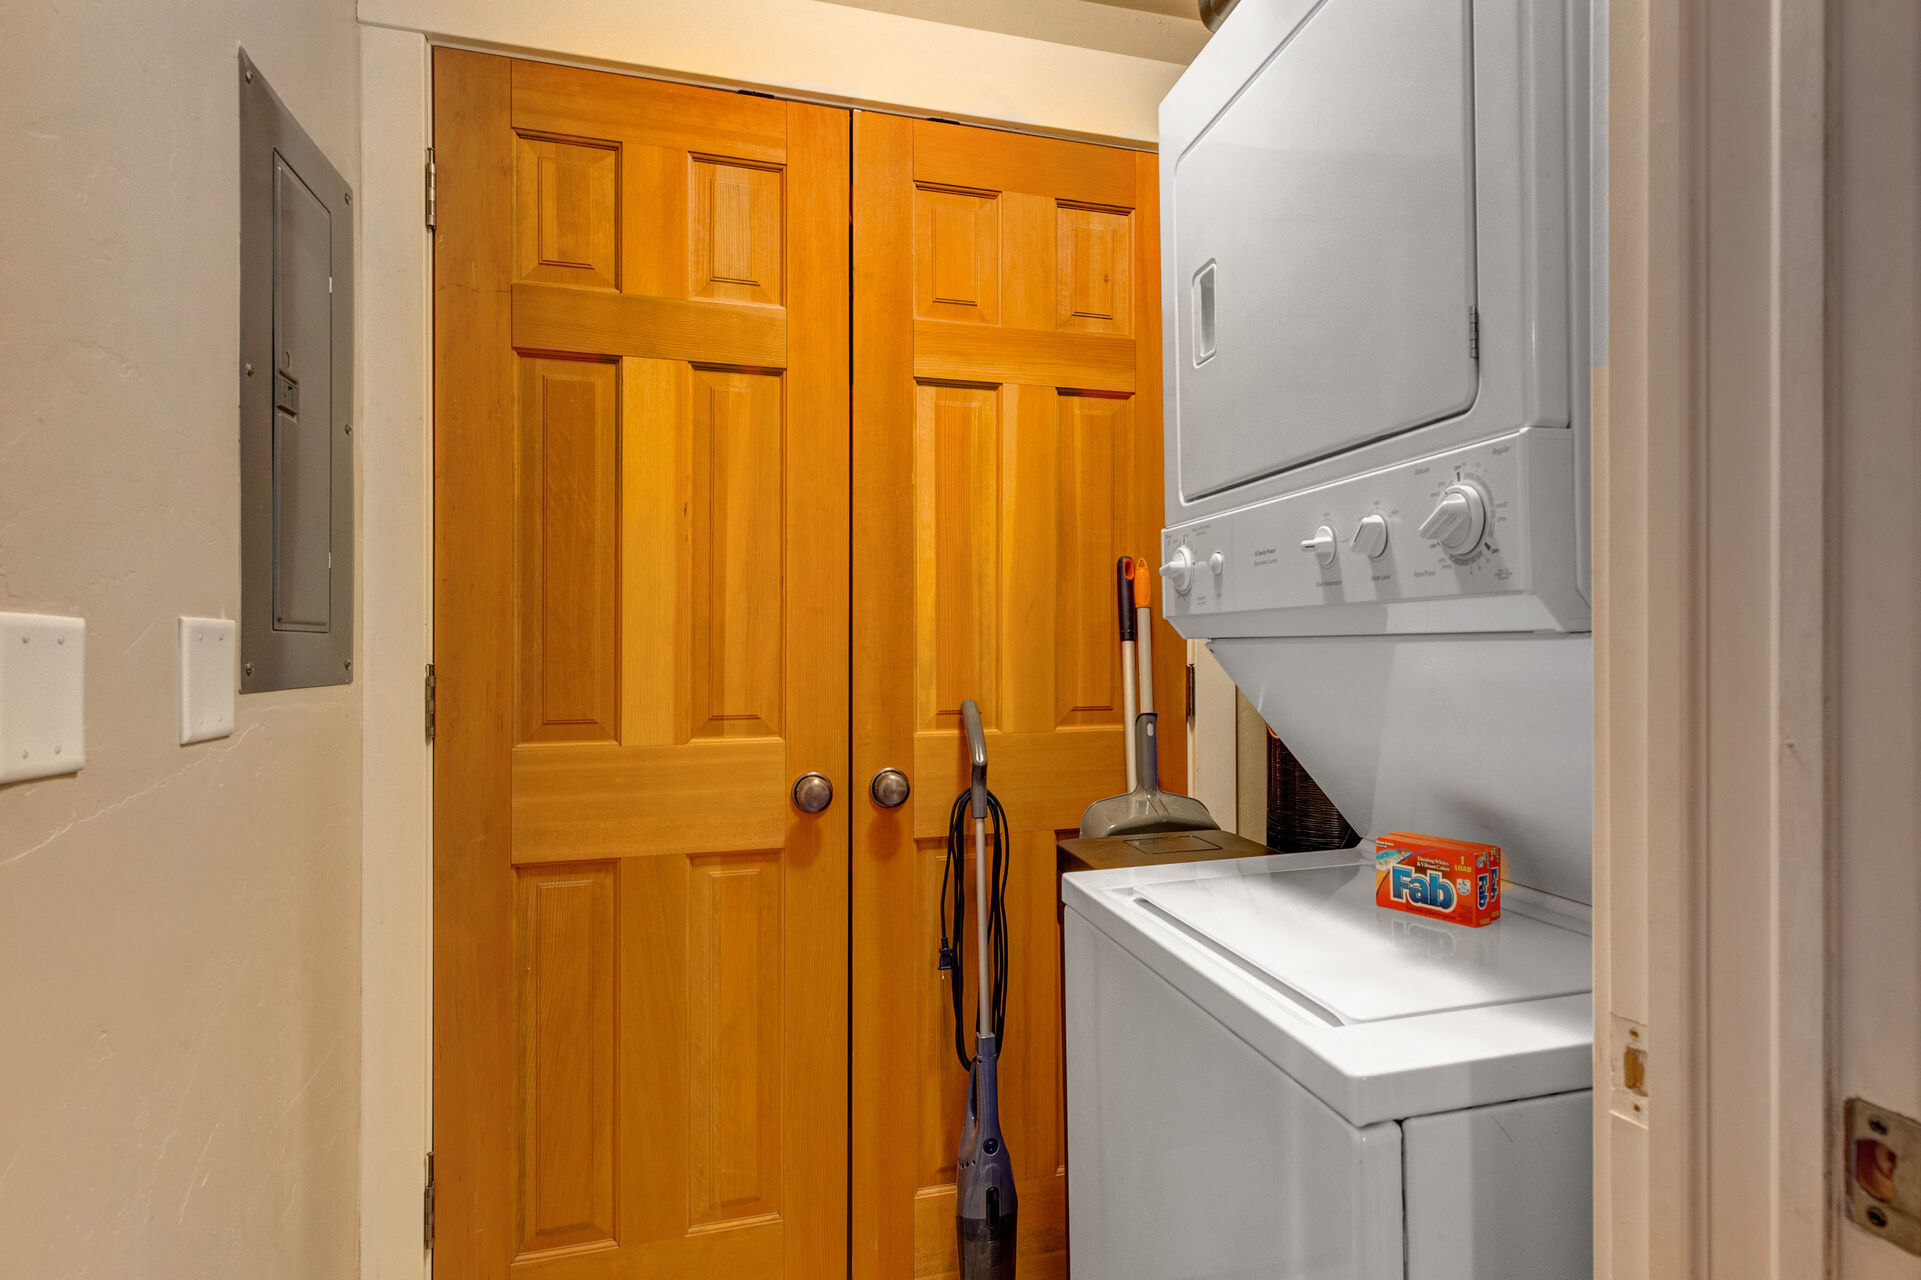 Private laundry closet with stackable washer/dryer